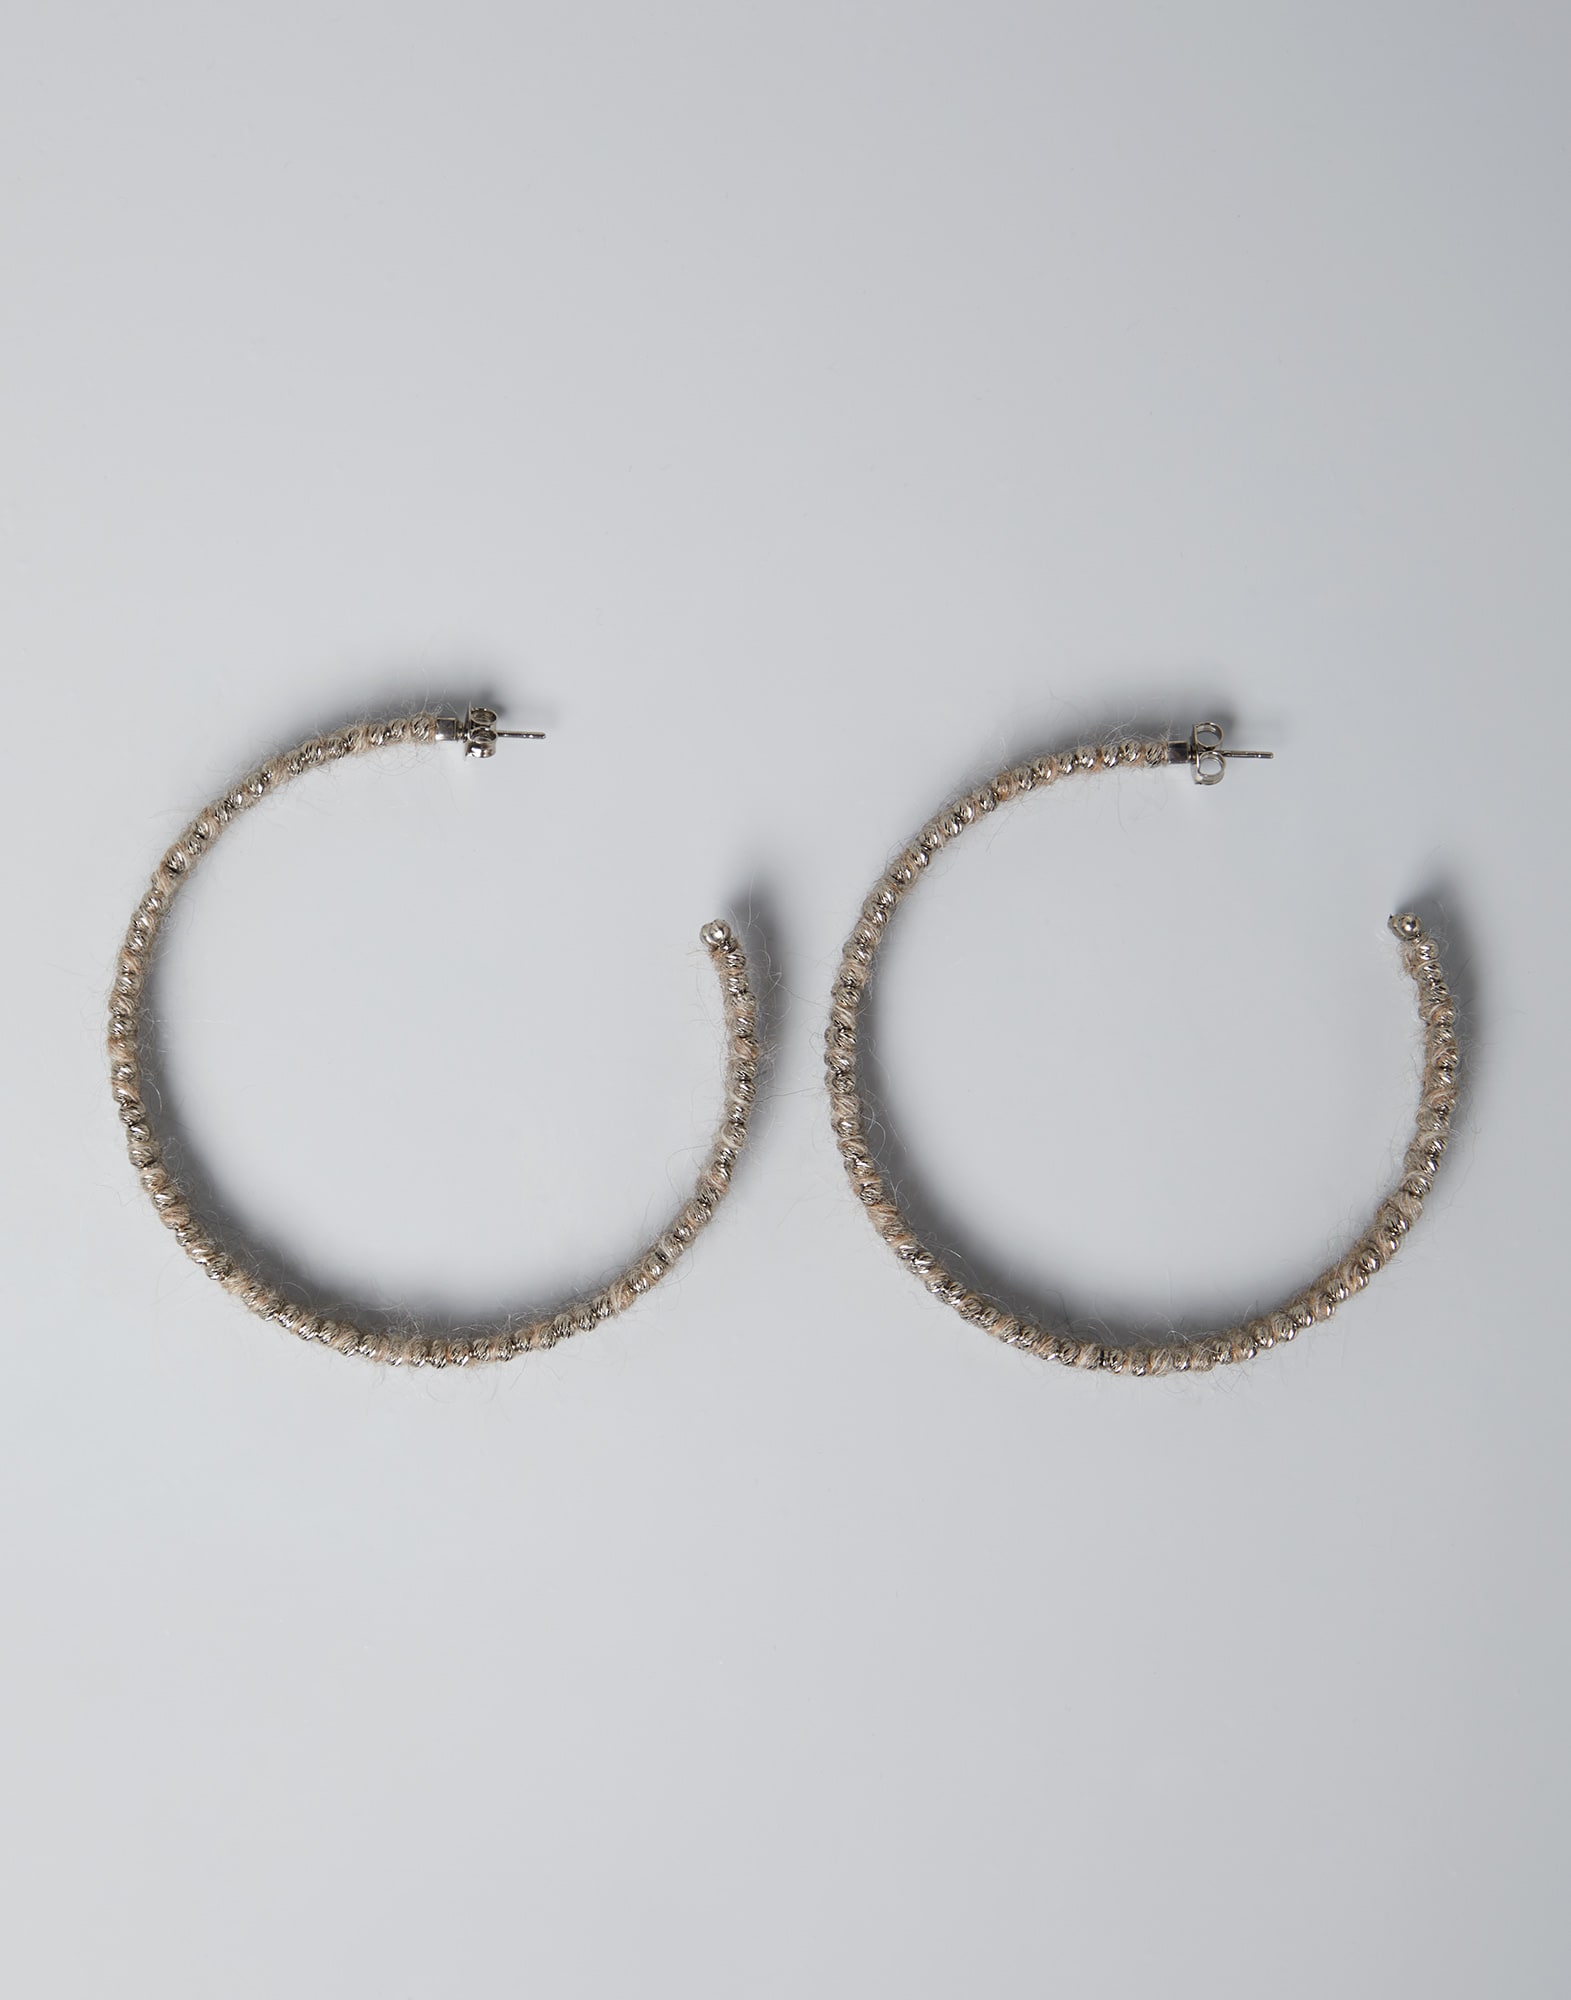 Earrings - Front view